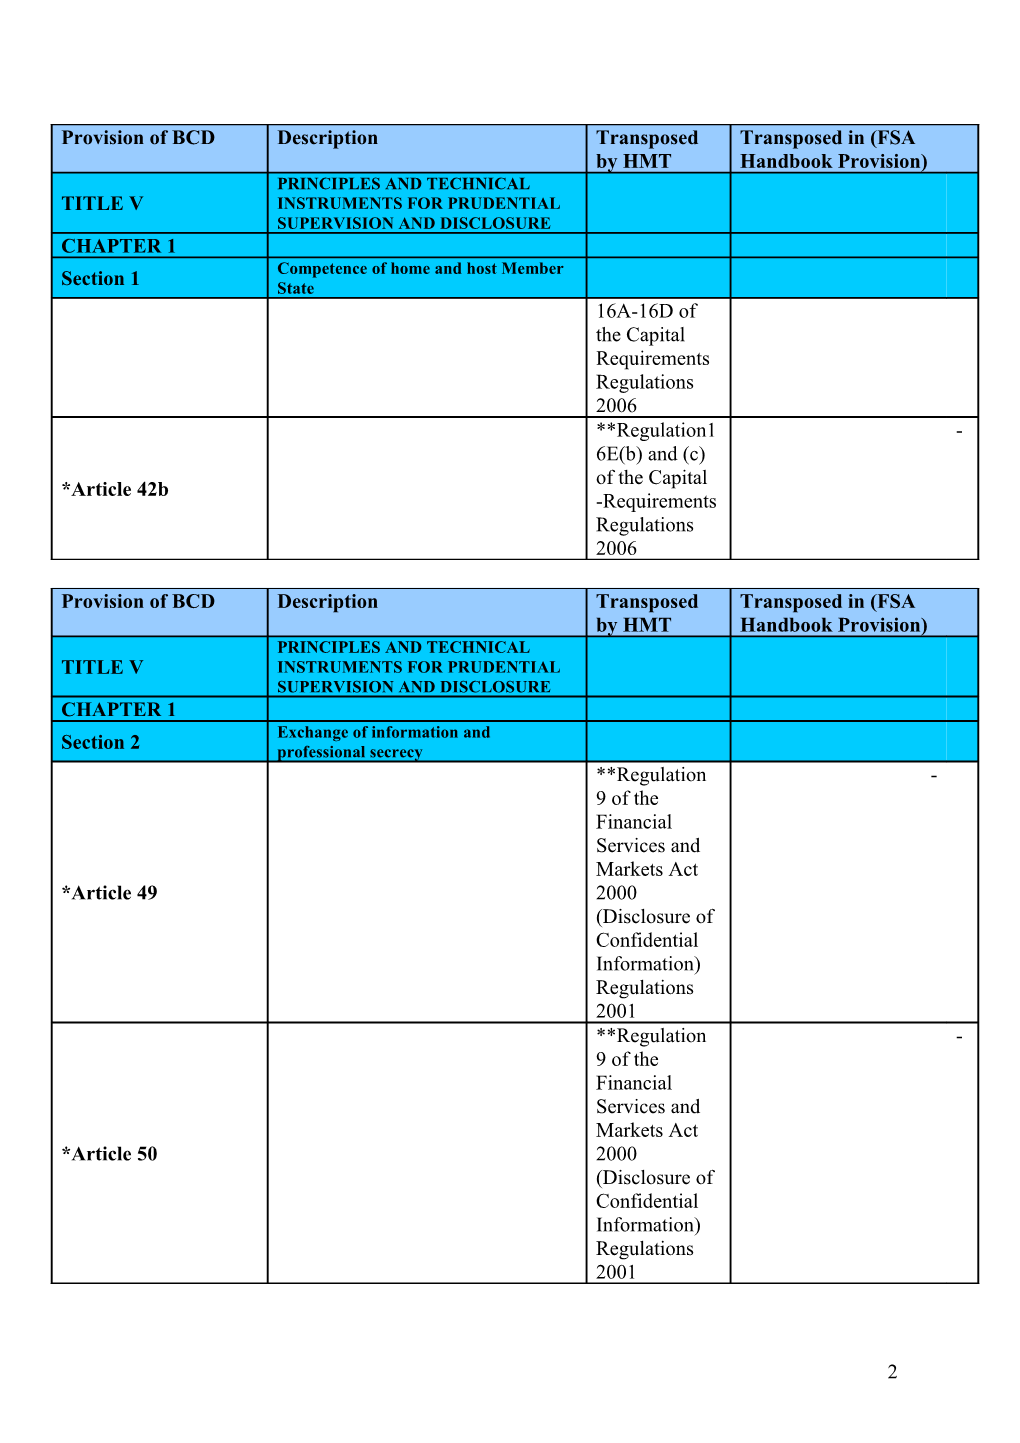 Transposition Table: Implementing Directive 2006/48/EC (Banking Consolidation Directive BCD )